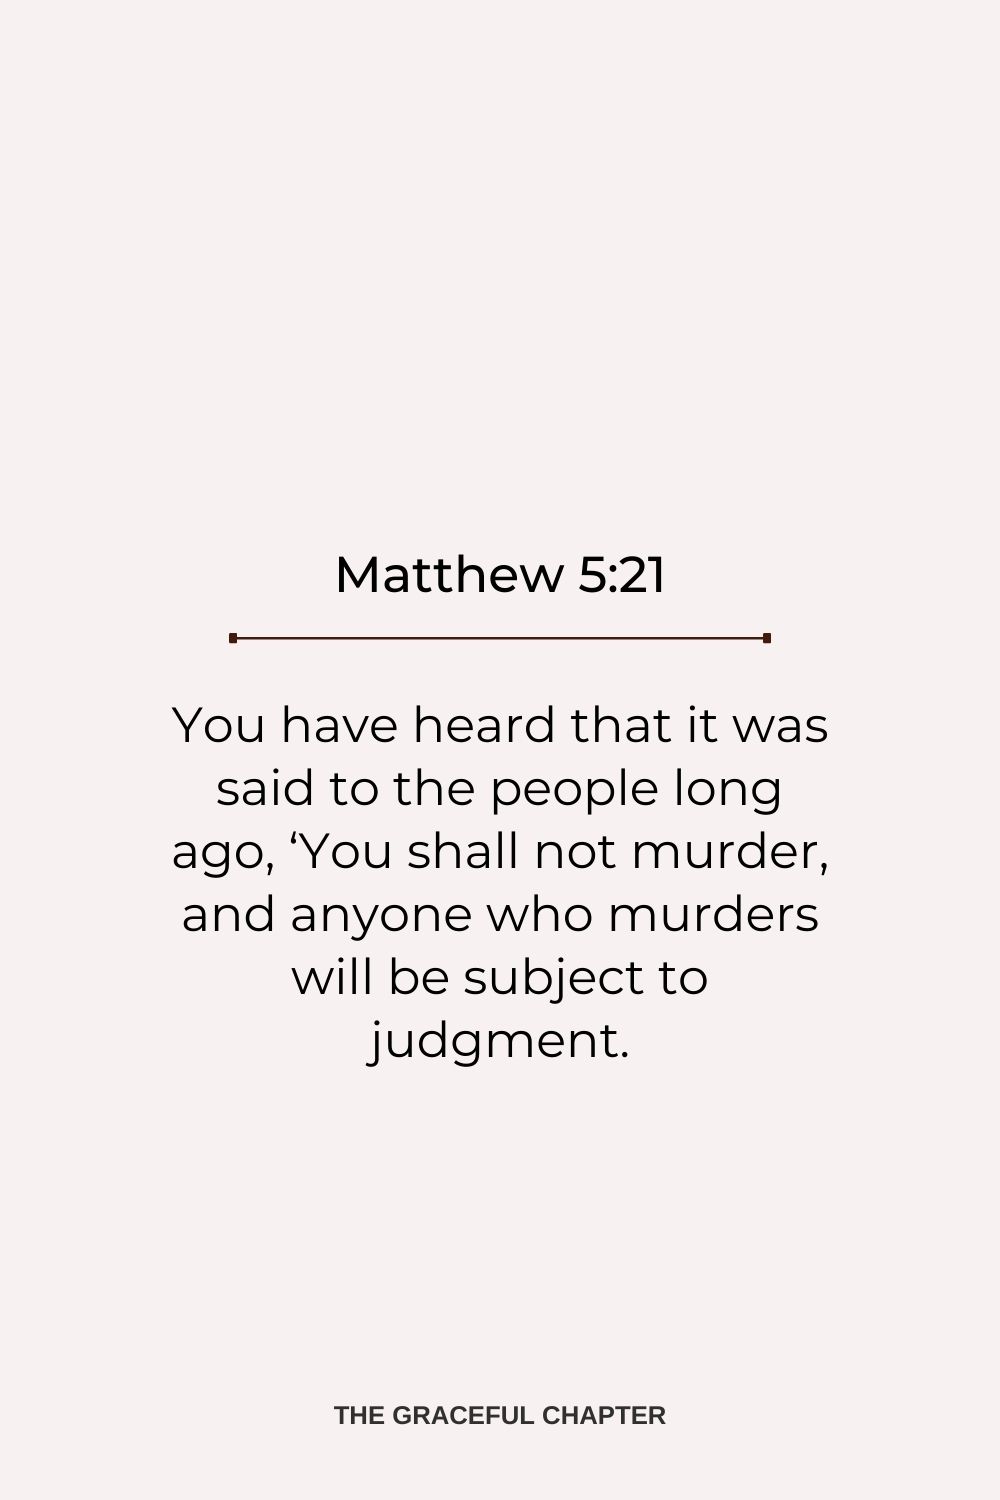 You have heard that it was said to the people long ago, ‘You shall not murder, and anyone who murders will be subject to judgment. Matthew 5:21